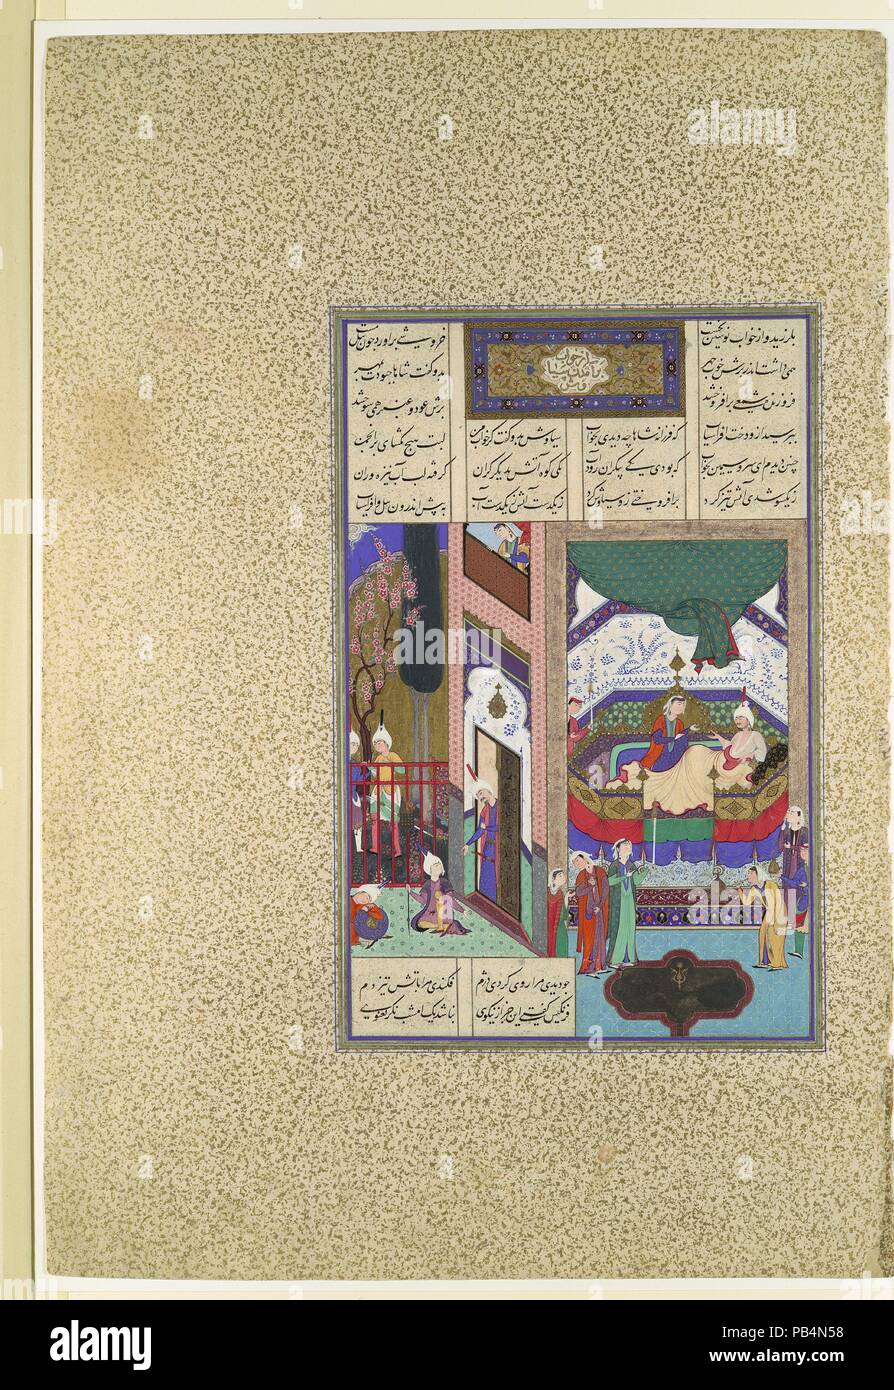 'Siyavush Recounts His Nightmare to Farangis', Folio 195r from the Shahnama (Book of Kings) of Shah Tahmasp. Artist: Painting attributed to Qadimi (active ca. 1525-65). Author: Abu'l Qasim Firdausi (935-1020). Dimensions: Painting: H. 11 1/16 in. (28.1 cm)   W. 7 5/16 in. (18.6 cm)  Page: H. 18 5/8 in. (47.3 cm)   W. 12 11/16 in. (32.2 cm)  Mat: H. 22 in. (55.9 cm)   W. 16 in. (40.6 cm). Workshop director: Mir Musavvir (active 1525-60). Date: ca. 1525-30.  Siyavush, a Persian prince, awoke one night from a horrible nightmare. The dream, which proved to be prophetic, showed the destruction of h Stock Photo